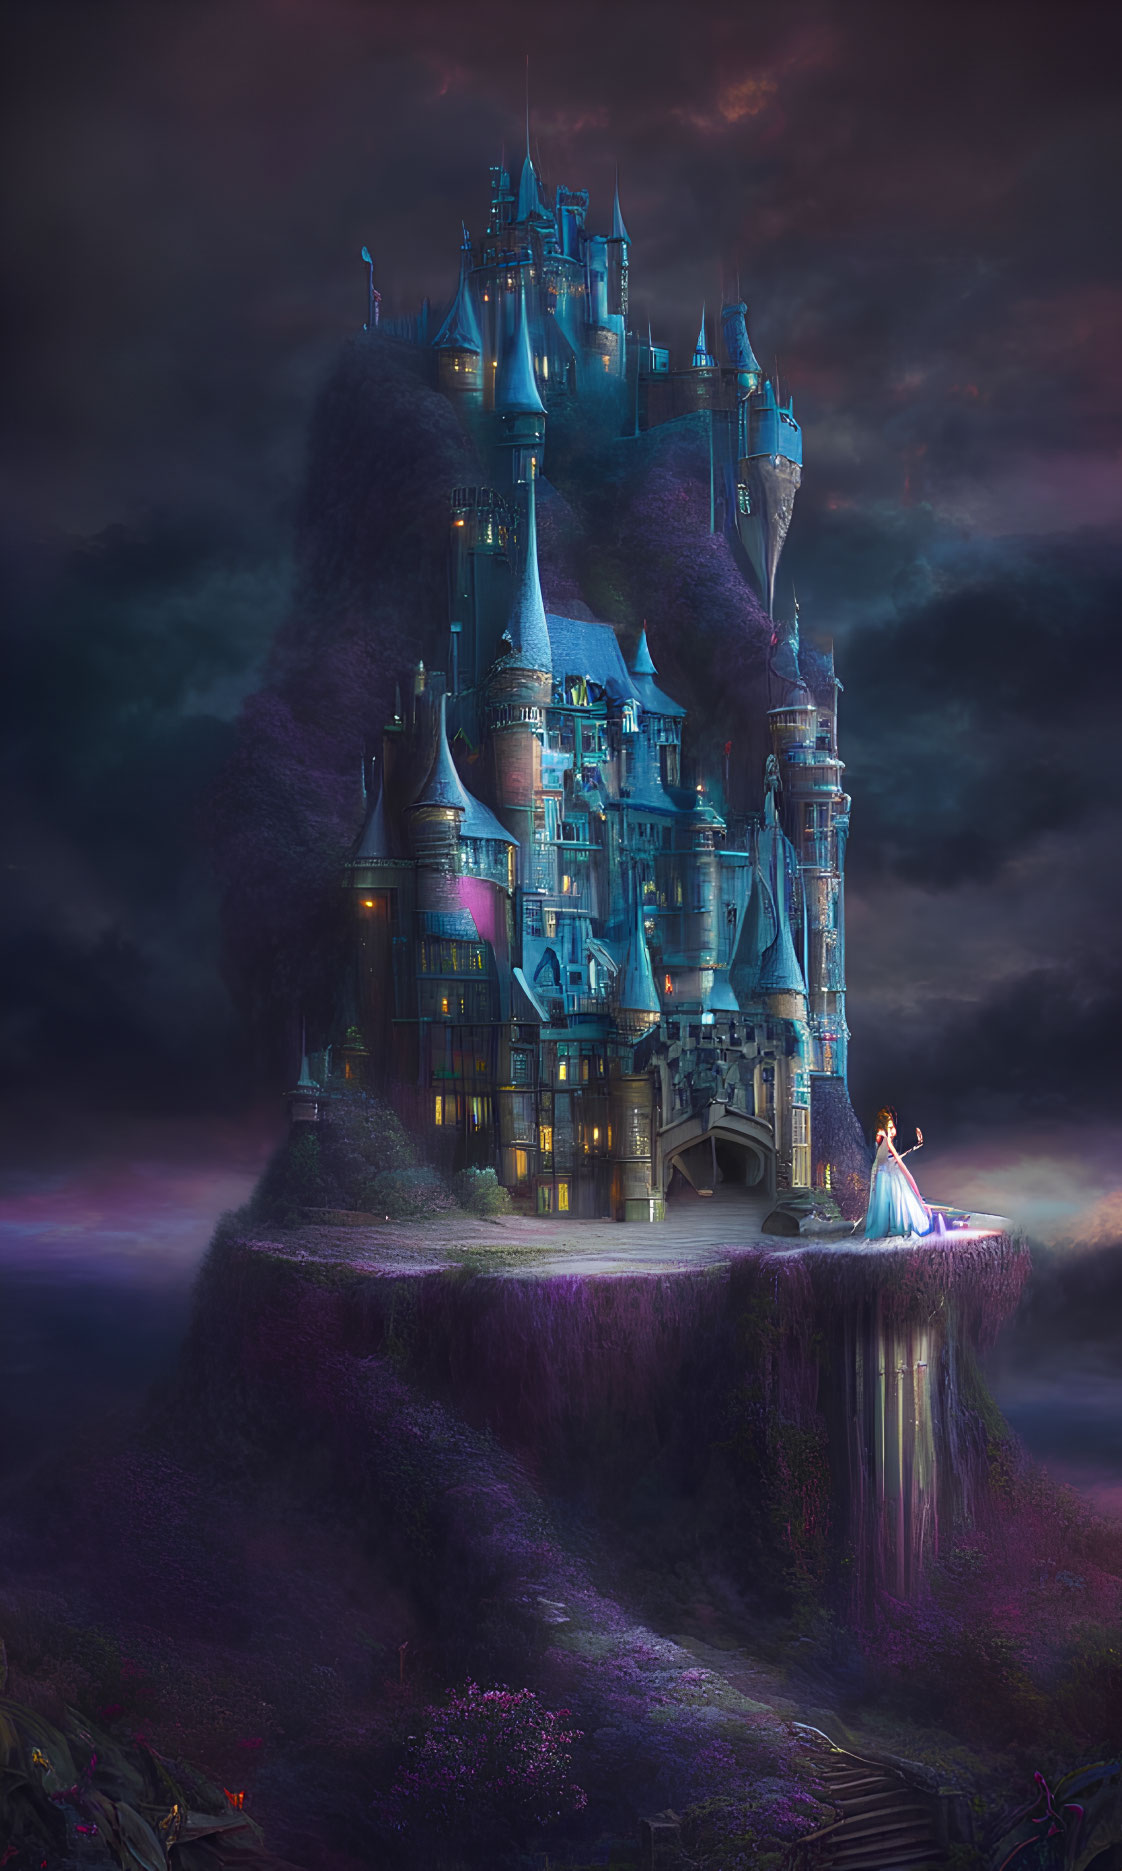 Enchanted castle on cliff with purple mist and woman in blue dress